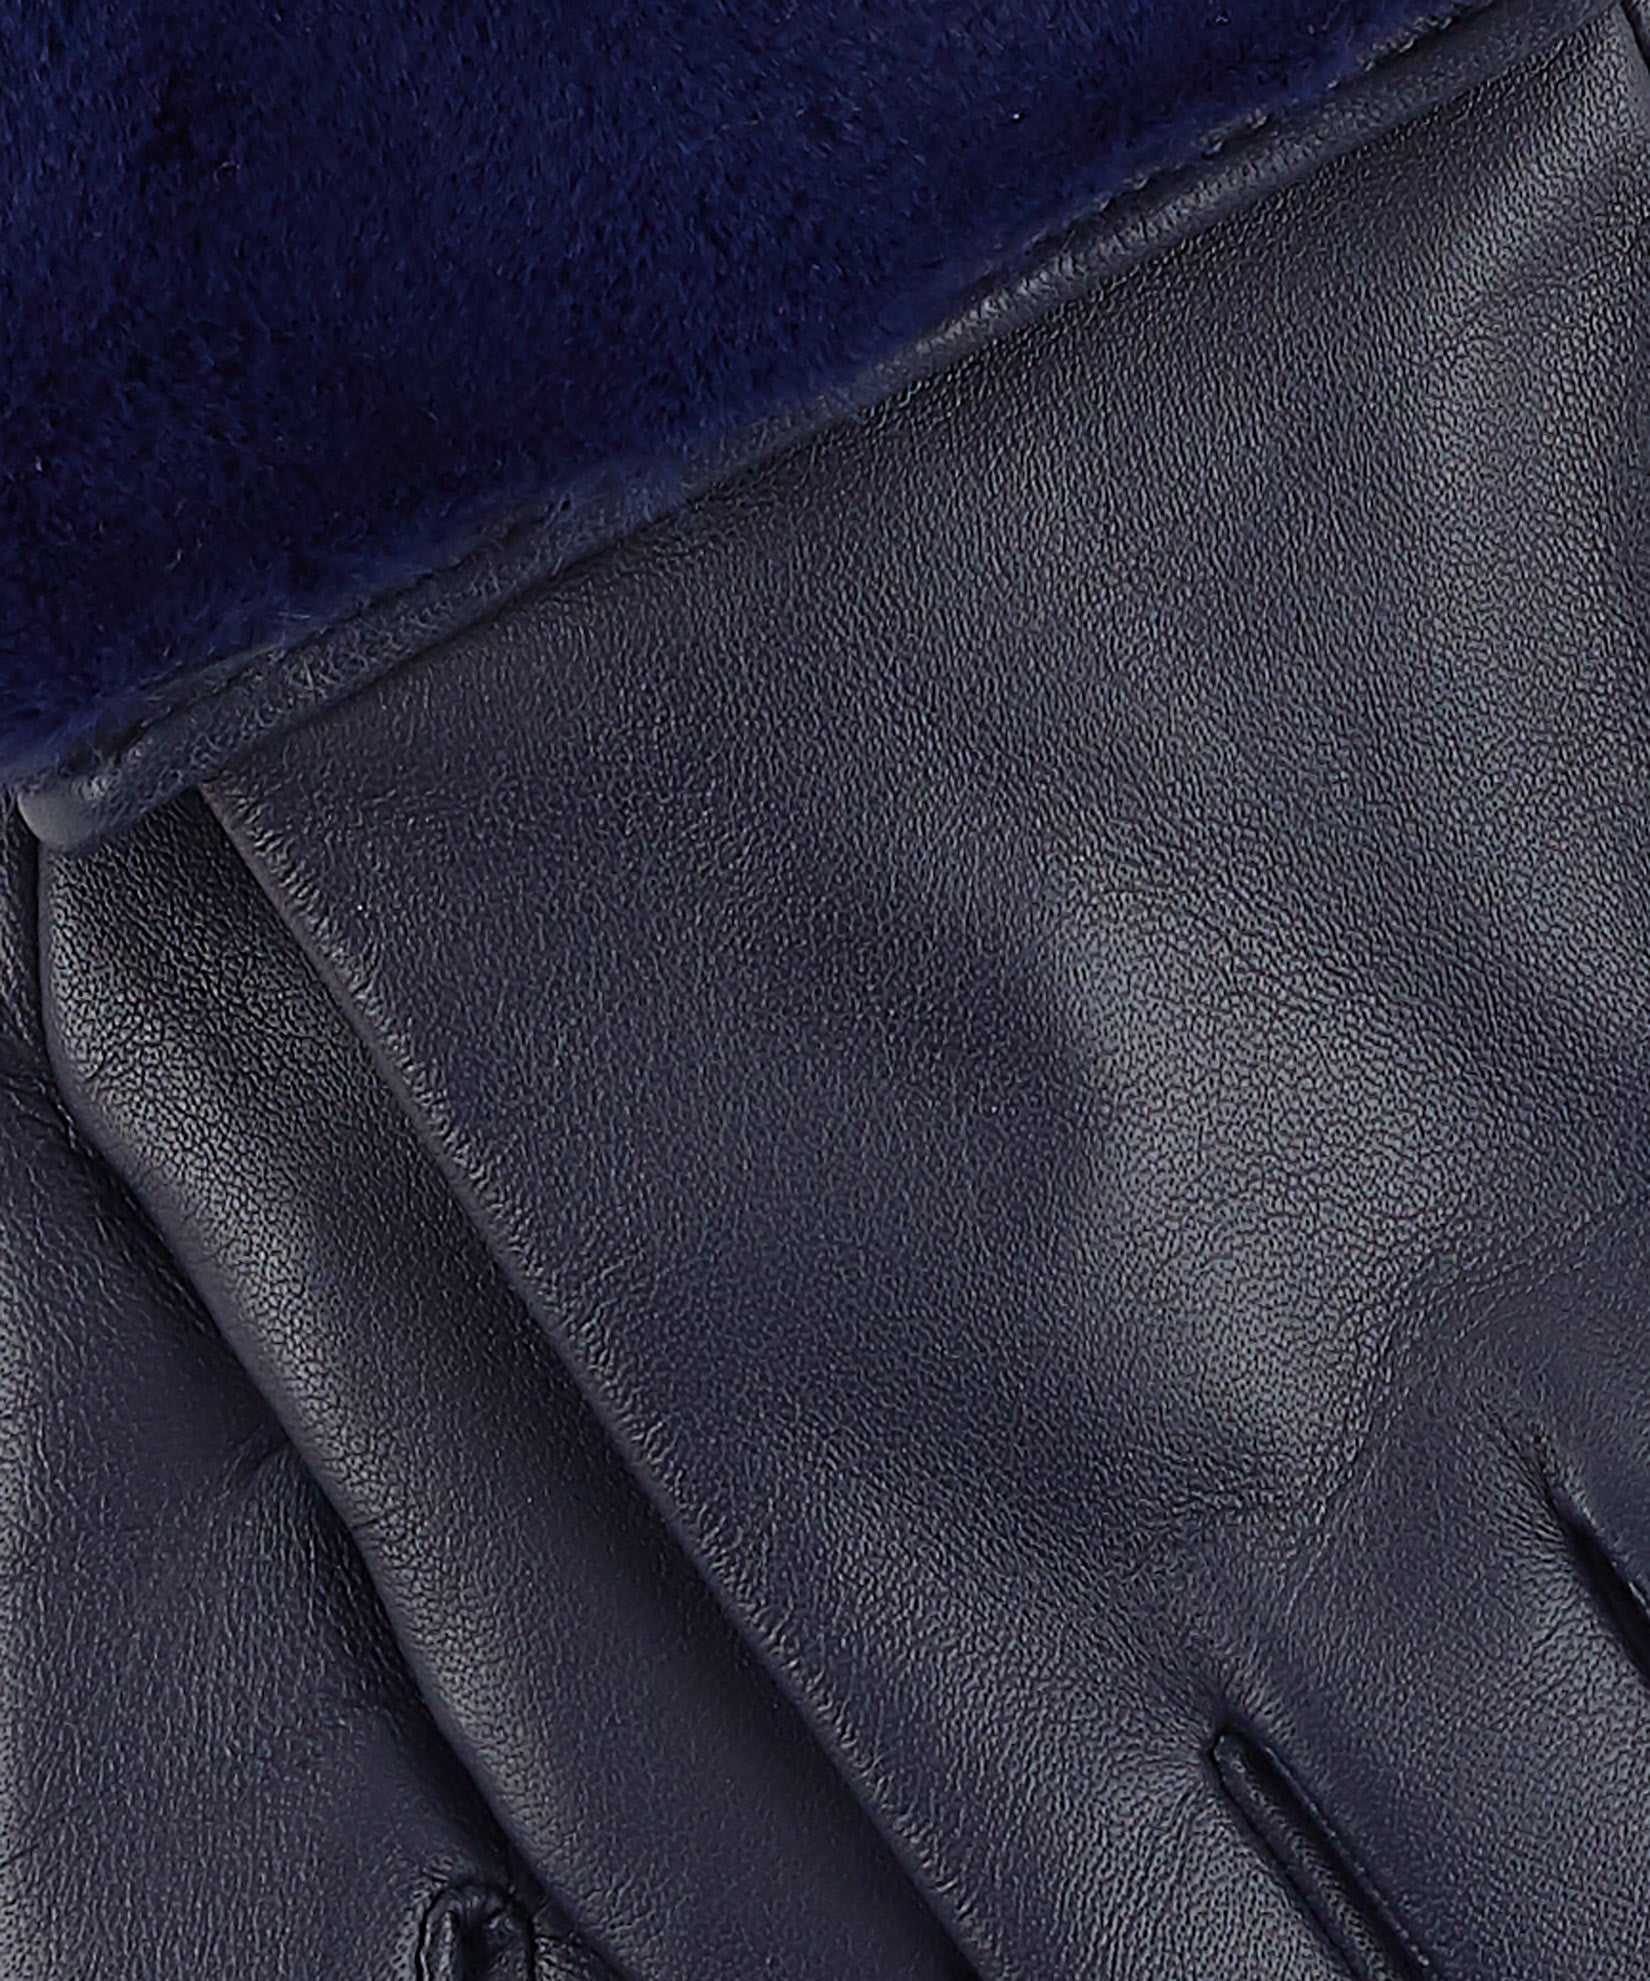 Faux Fur Cuff Glove in color Navy